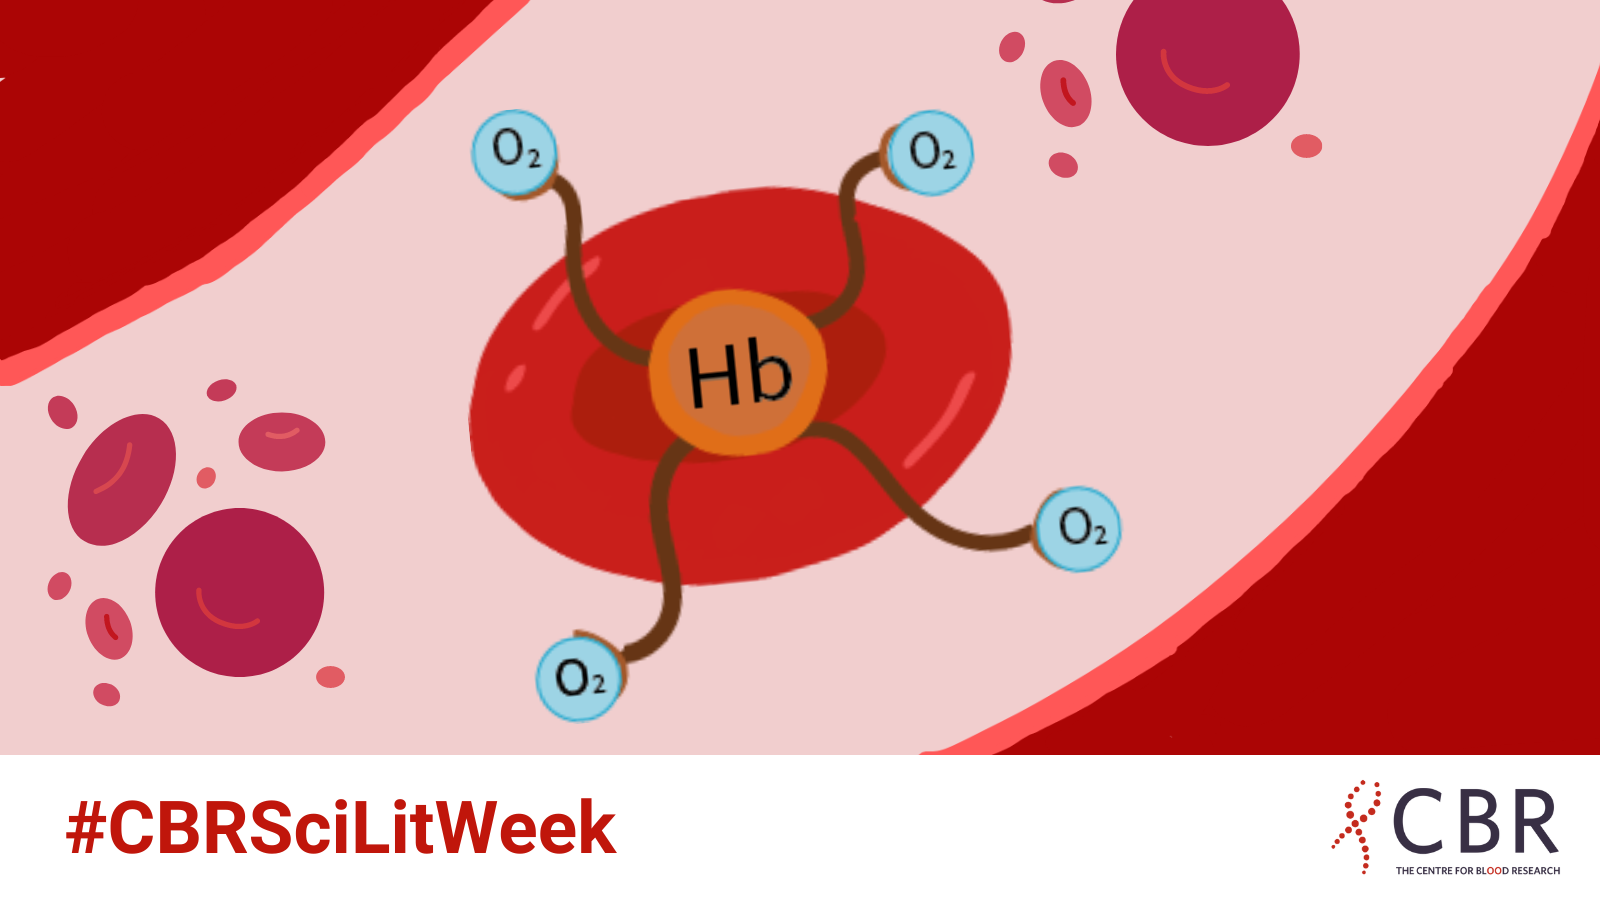 A red blood cell in the bloodstream with the Hb protein holding four oxygen molecules